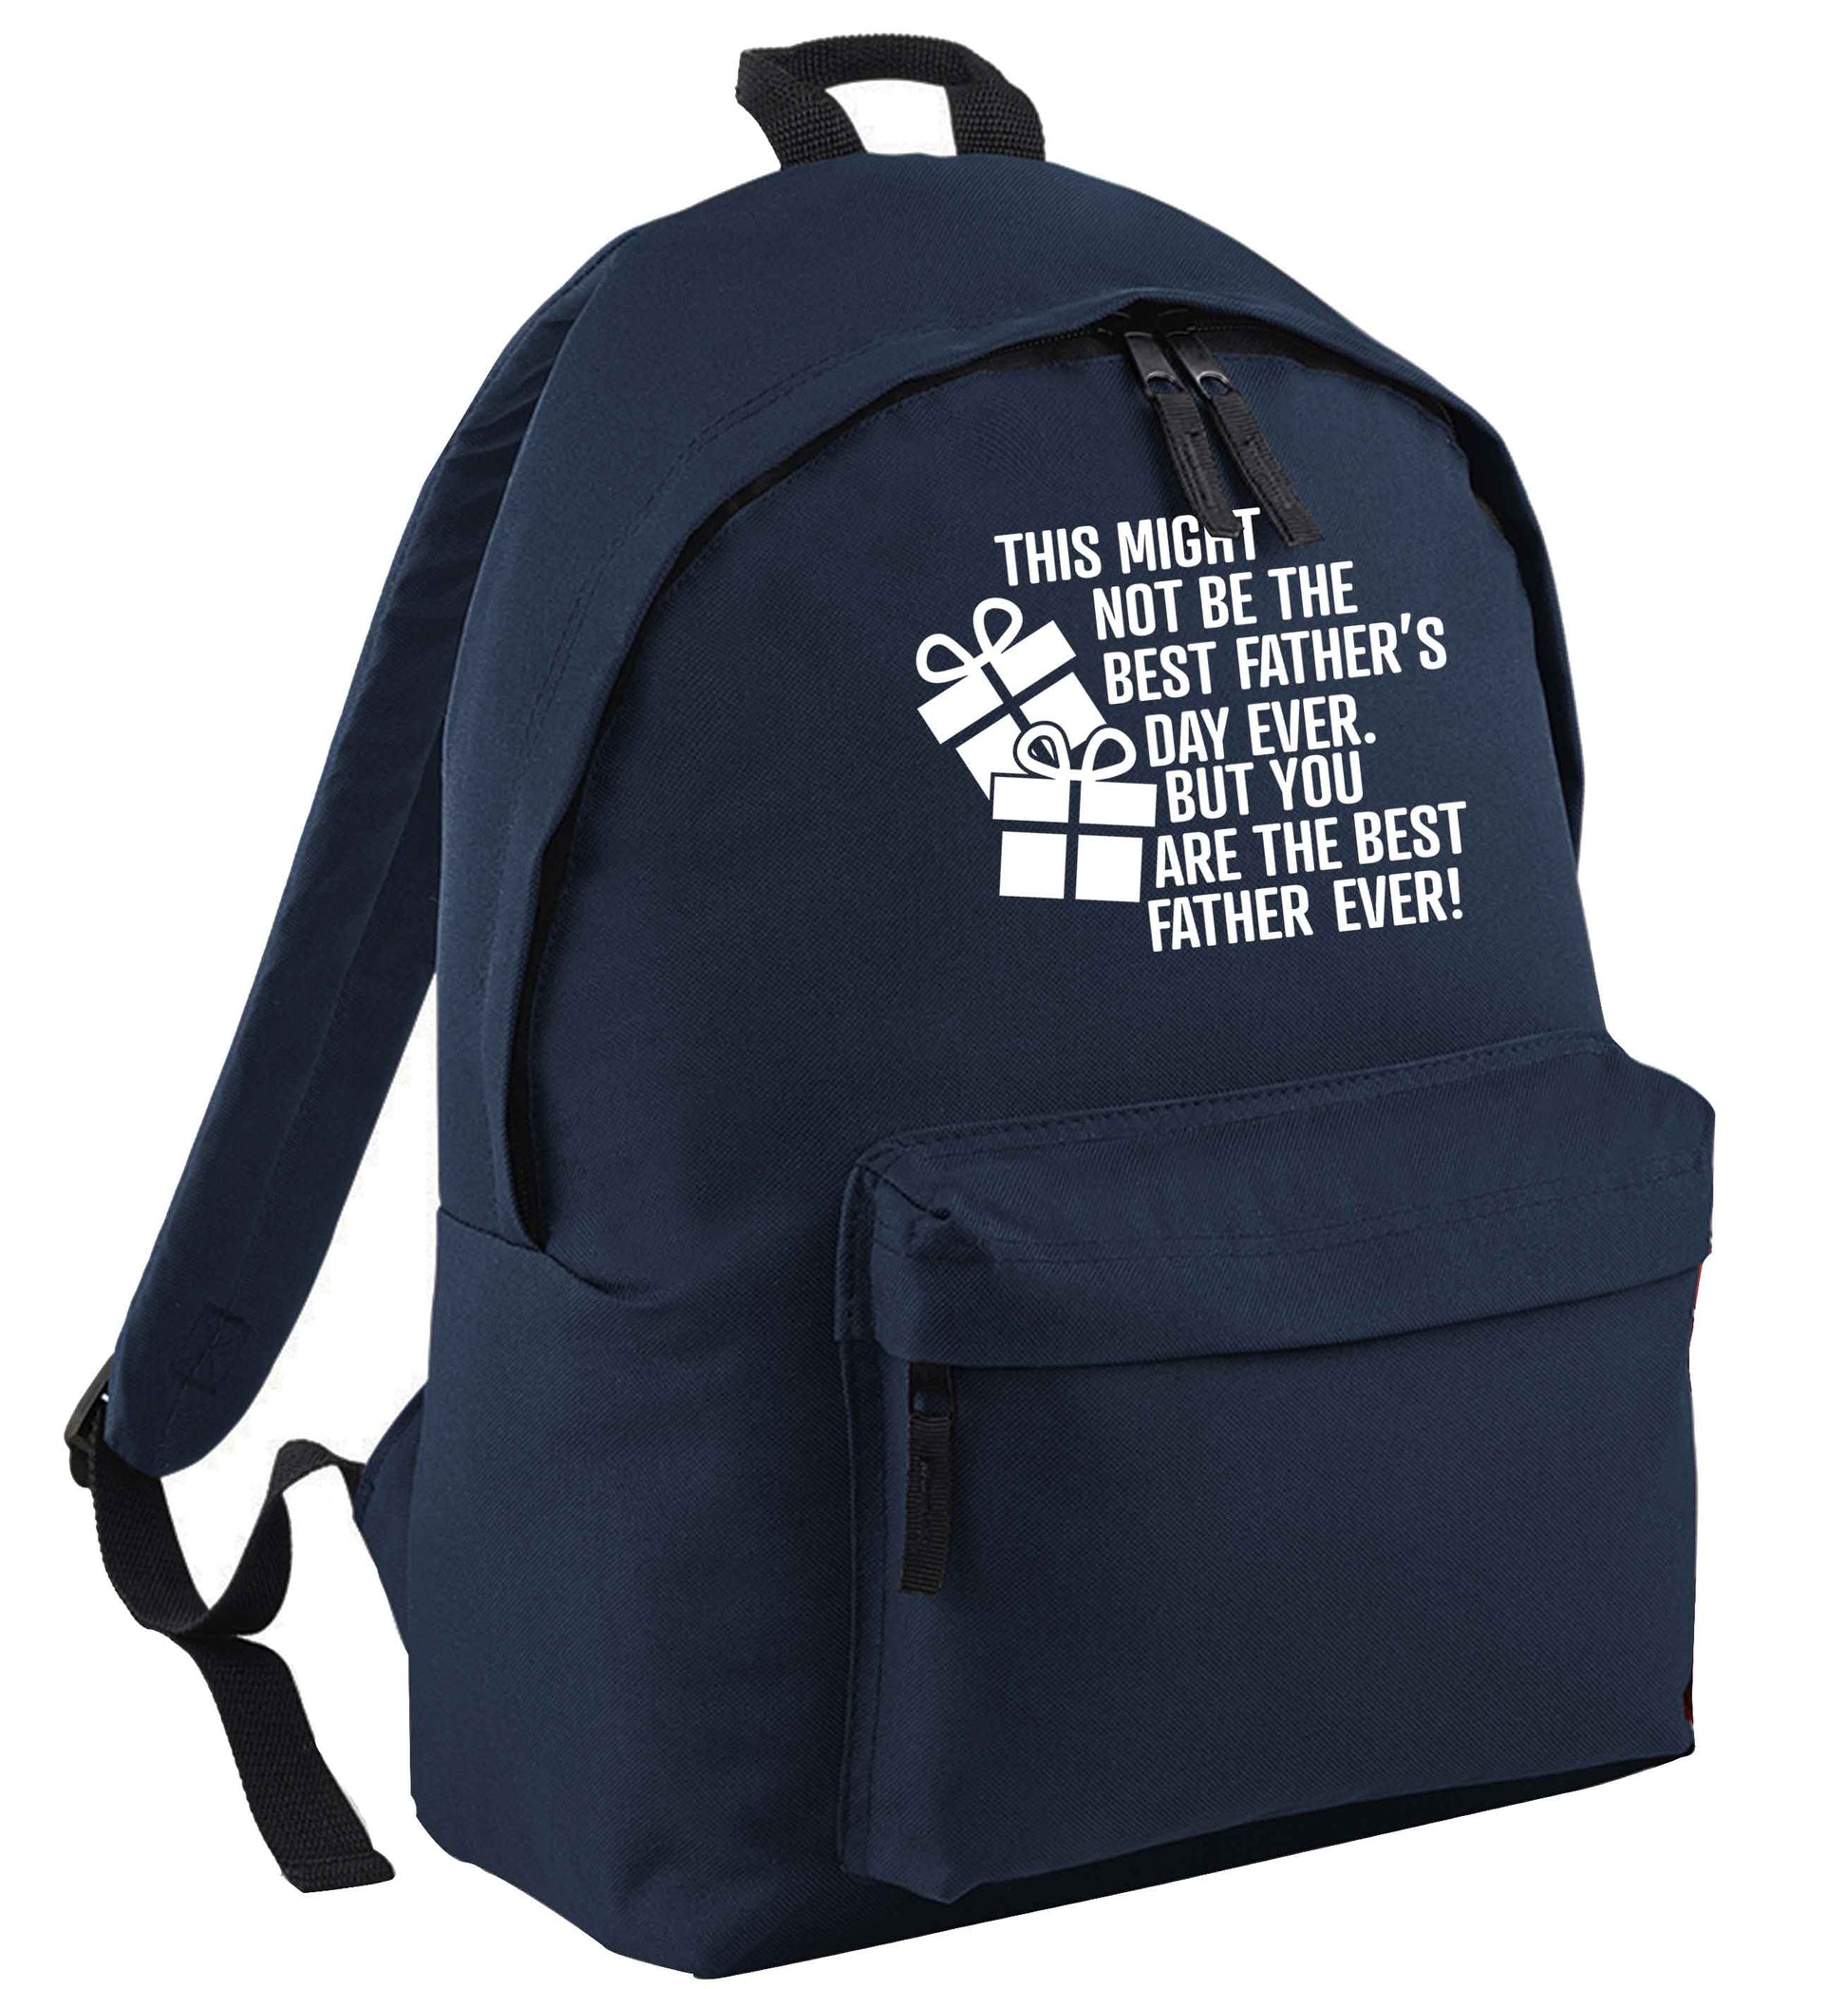 It might not be the best Father's Day ever but you are the best father ever! navy adults backpack